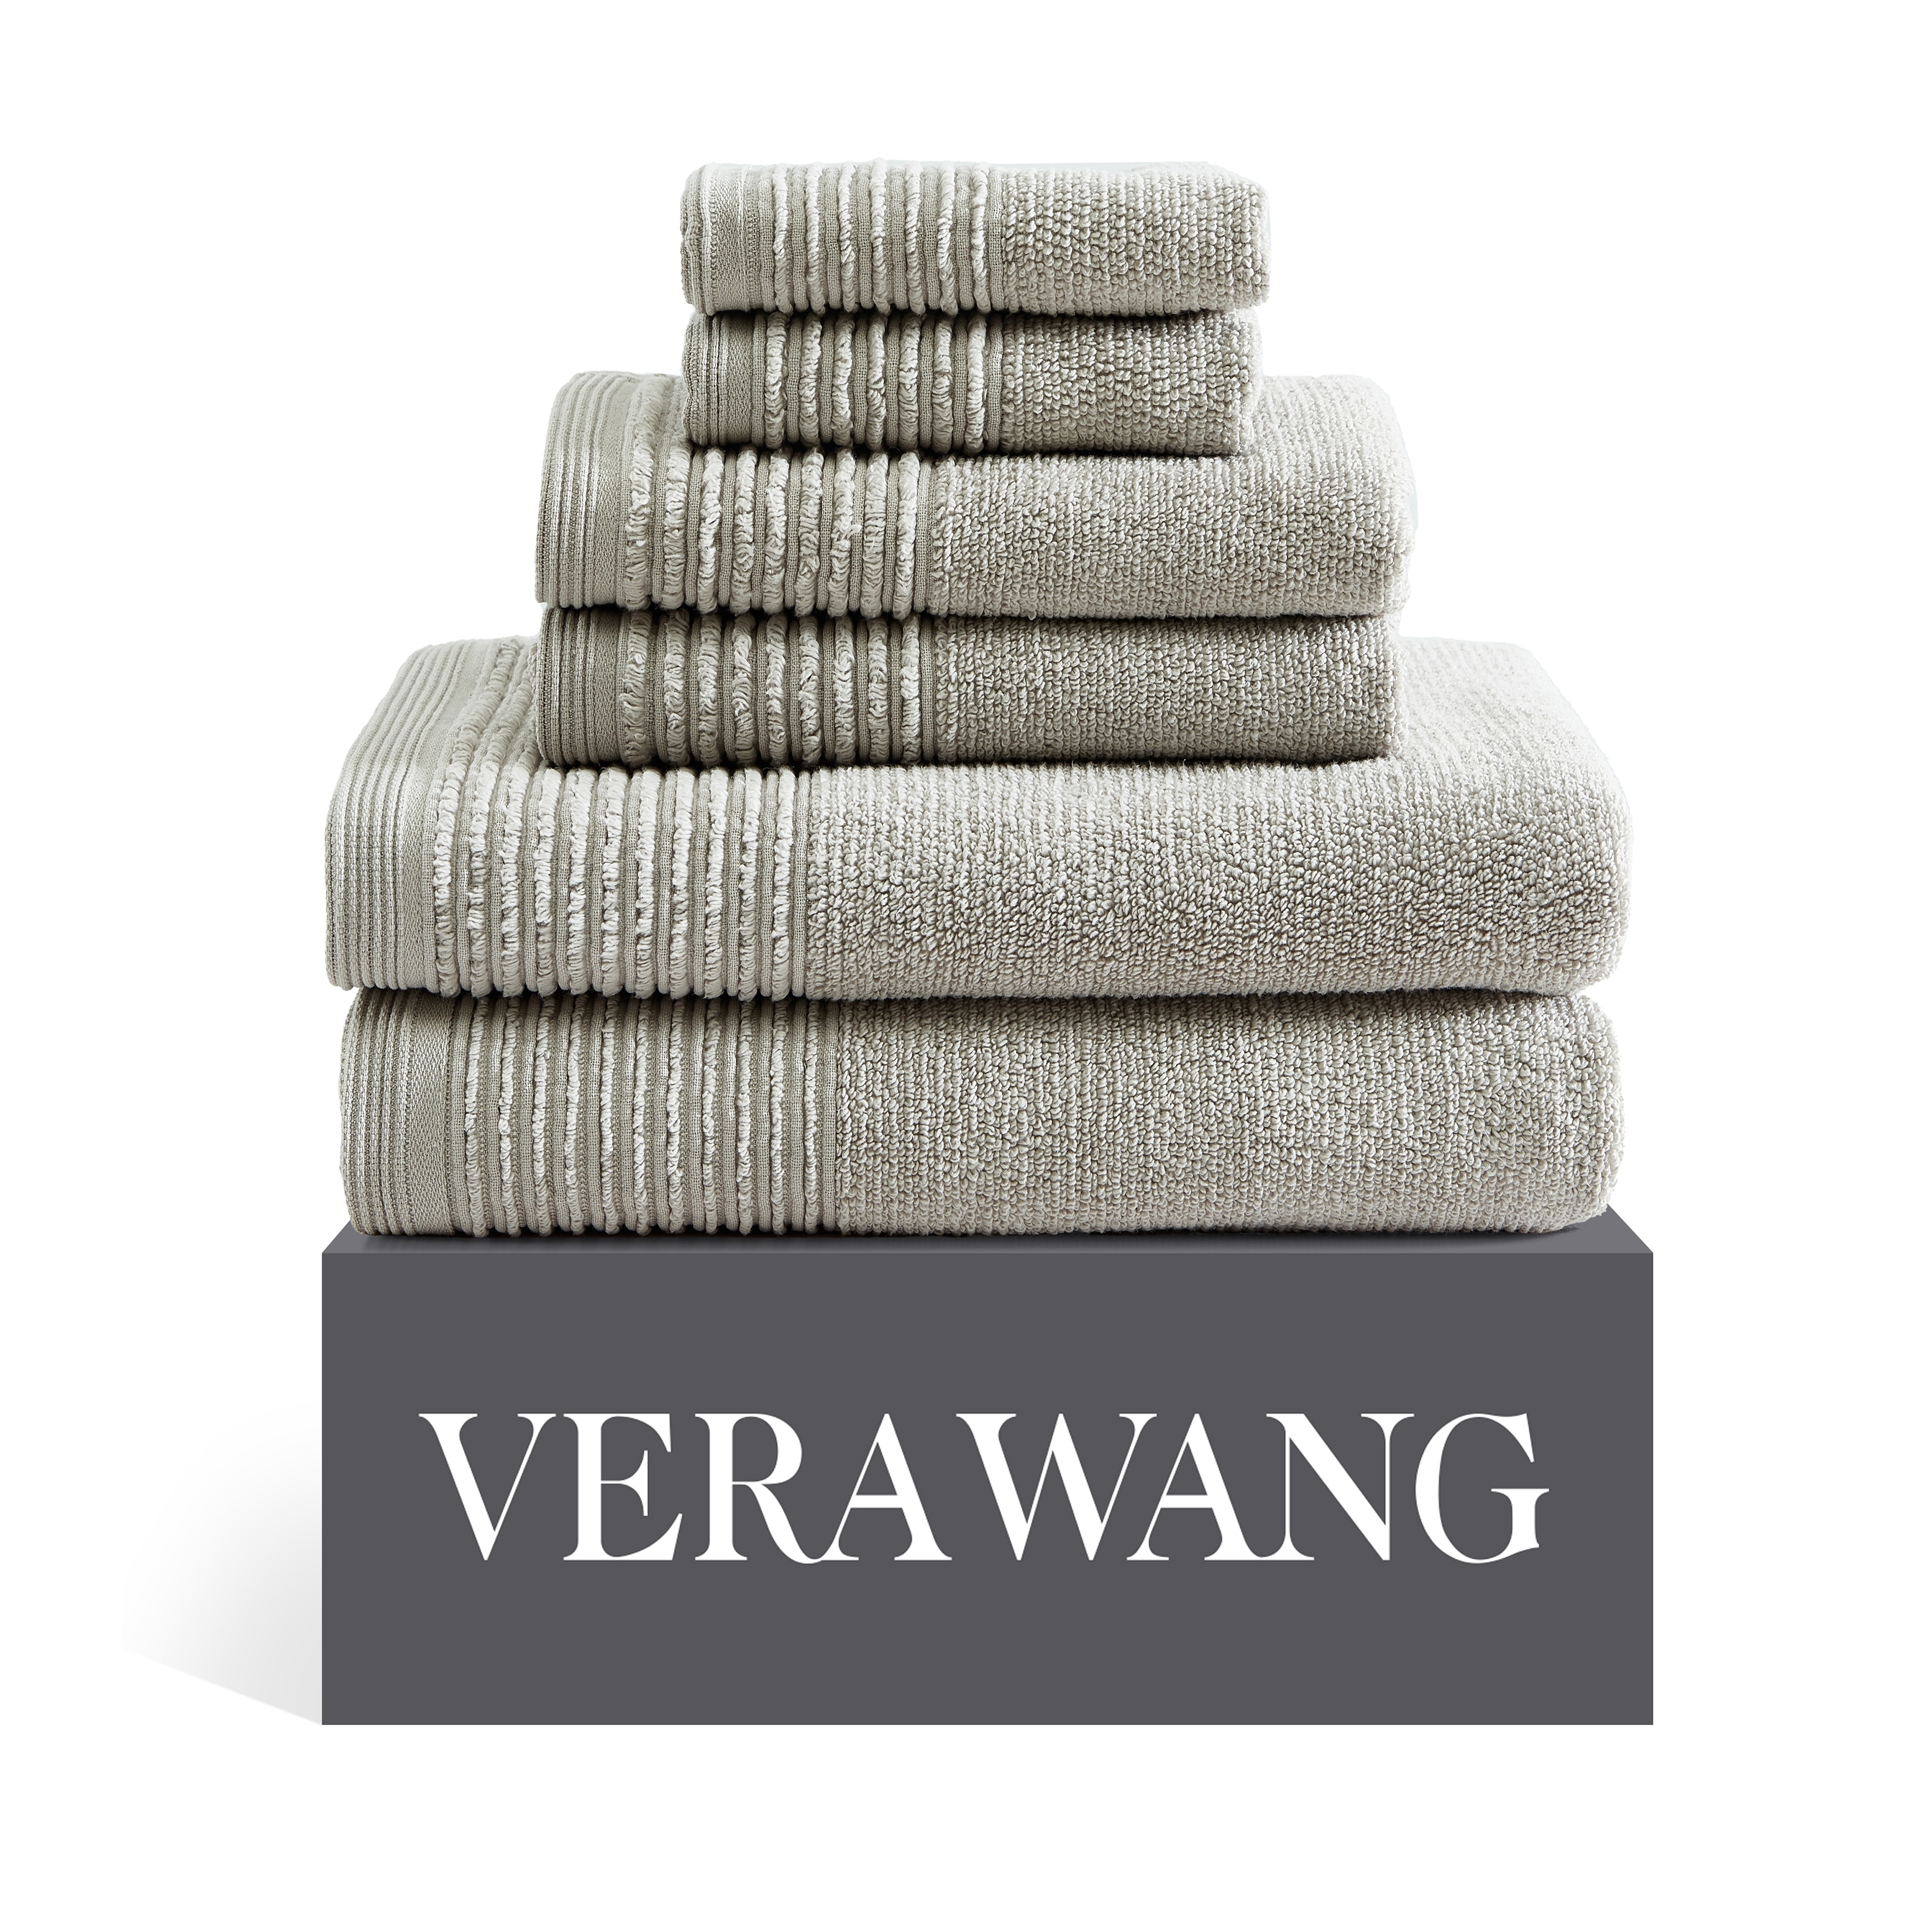 https://ak1.ostkcdn.com/images/products/is/images/direct/2b3dd1662f171ba0a7974ed5307b57fd8ae6a041/Vera-Wang-Sculpted-Pleat-Solid-Cotton-Multi-Size-Towel-Set.jpg